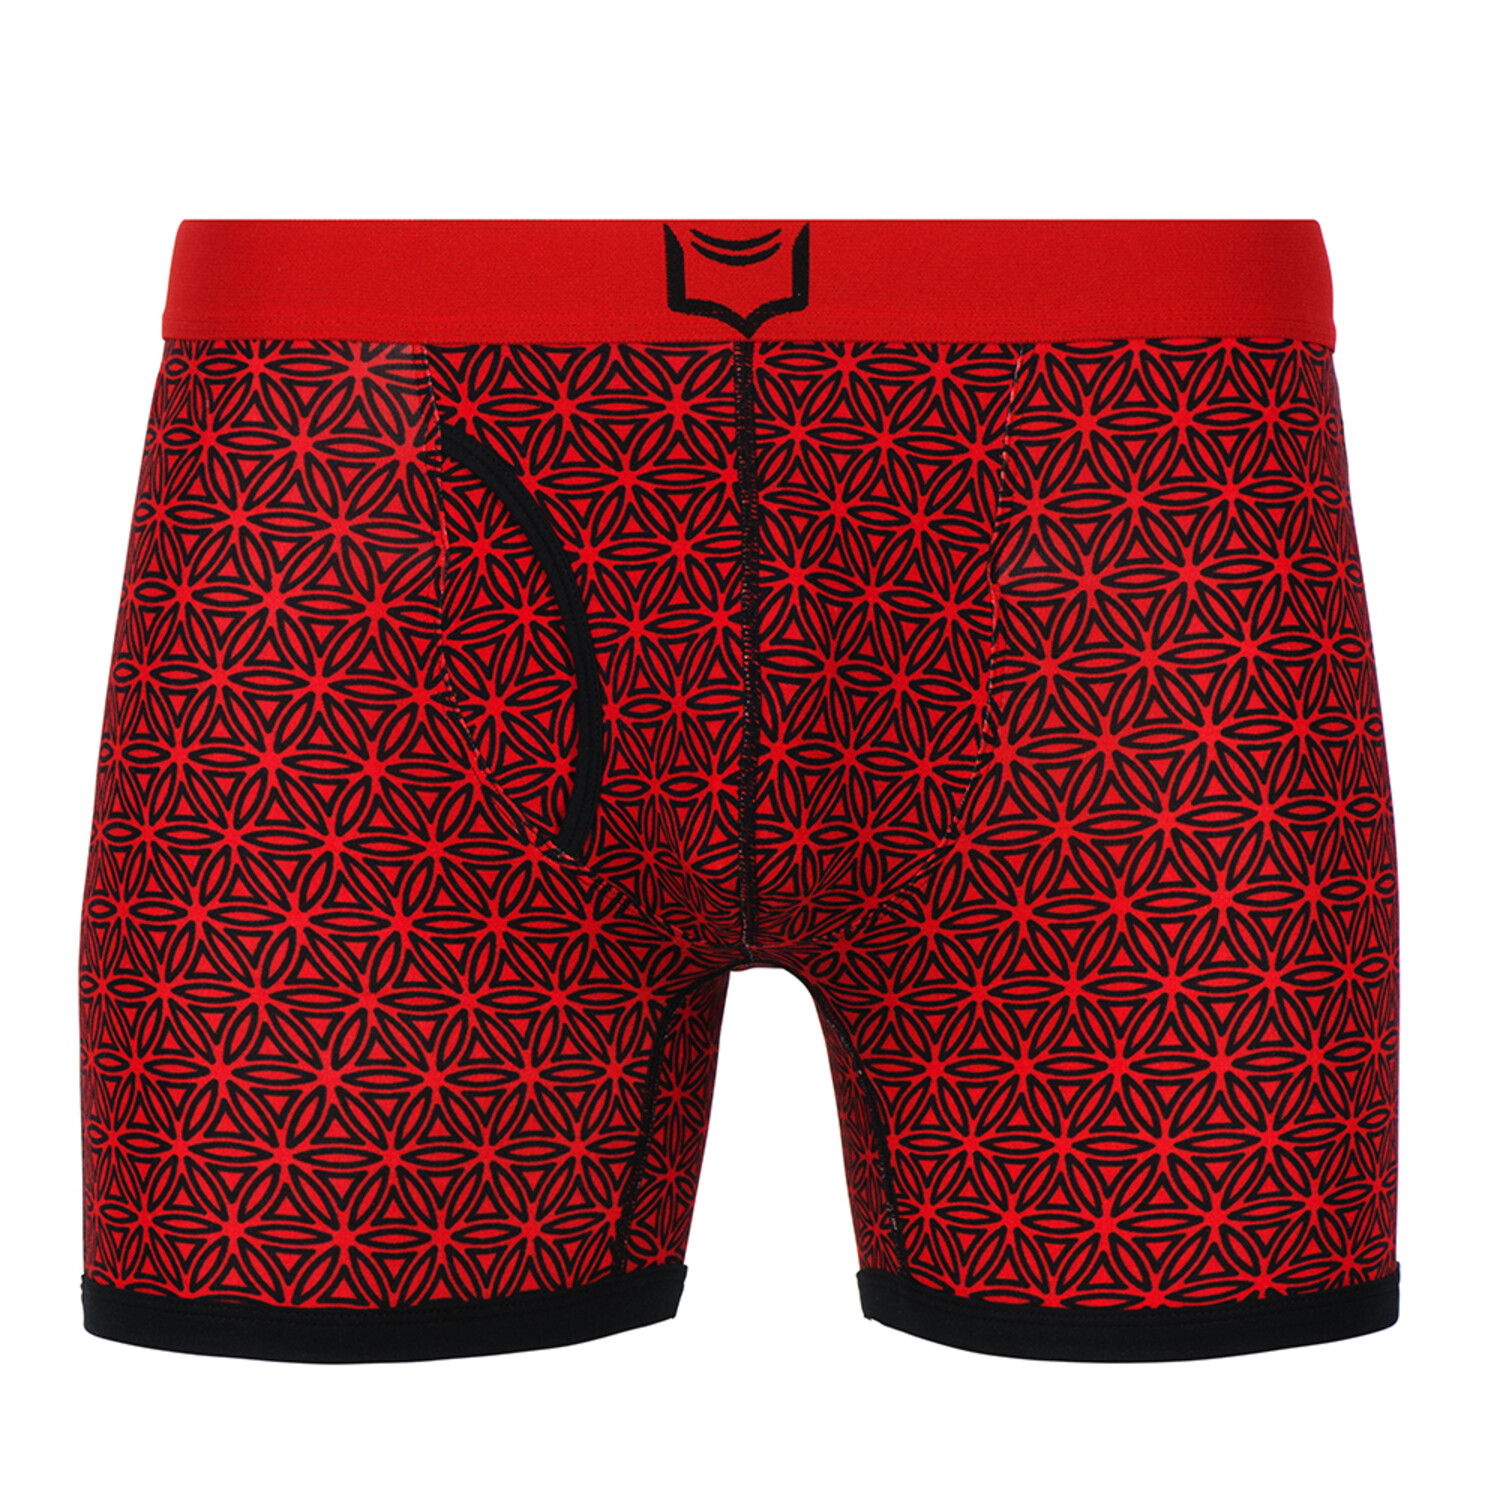 SHEATH 4.0 Men's Dual Pouch Boxer Brief // Red (Large) - Sheath Underwear -  Touch of Modern